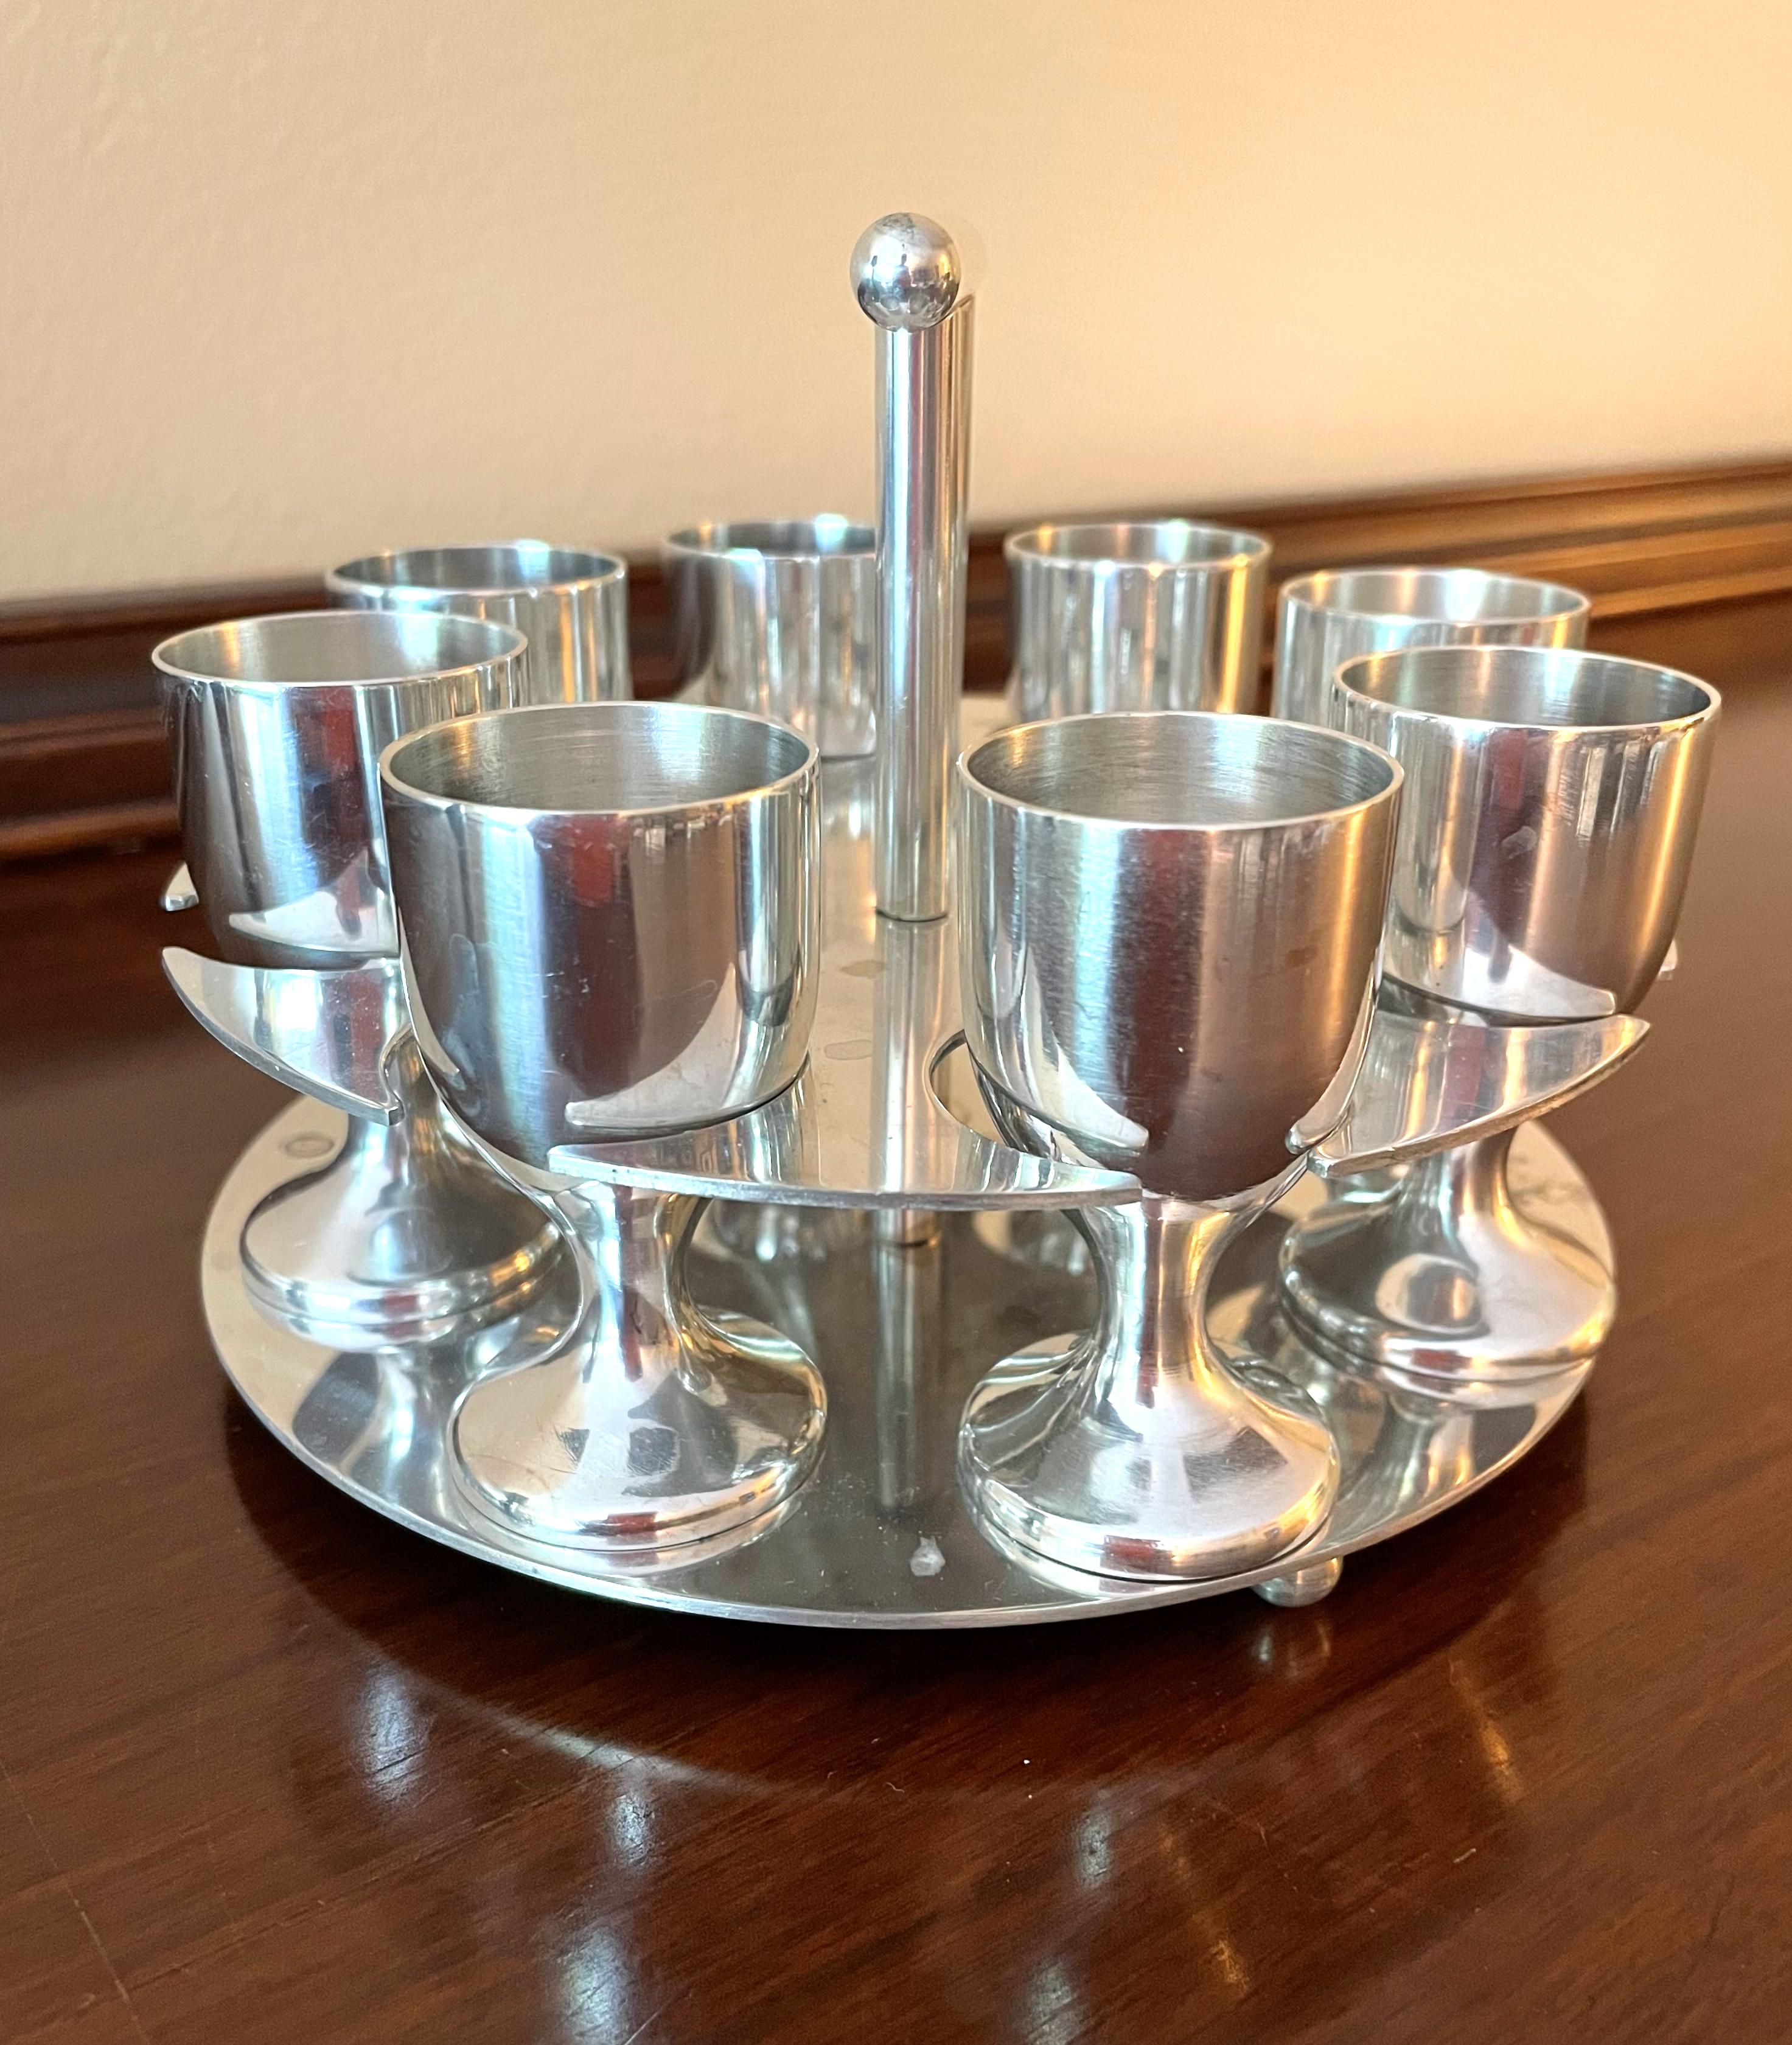 Mid-Century Modern Mid-20th Century Stainless Steel Aperitifs / Cordials or Shot Glasses, Set of 8 For Sale